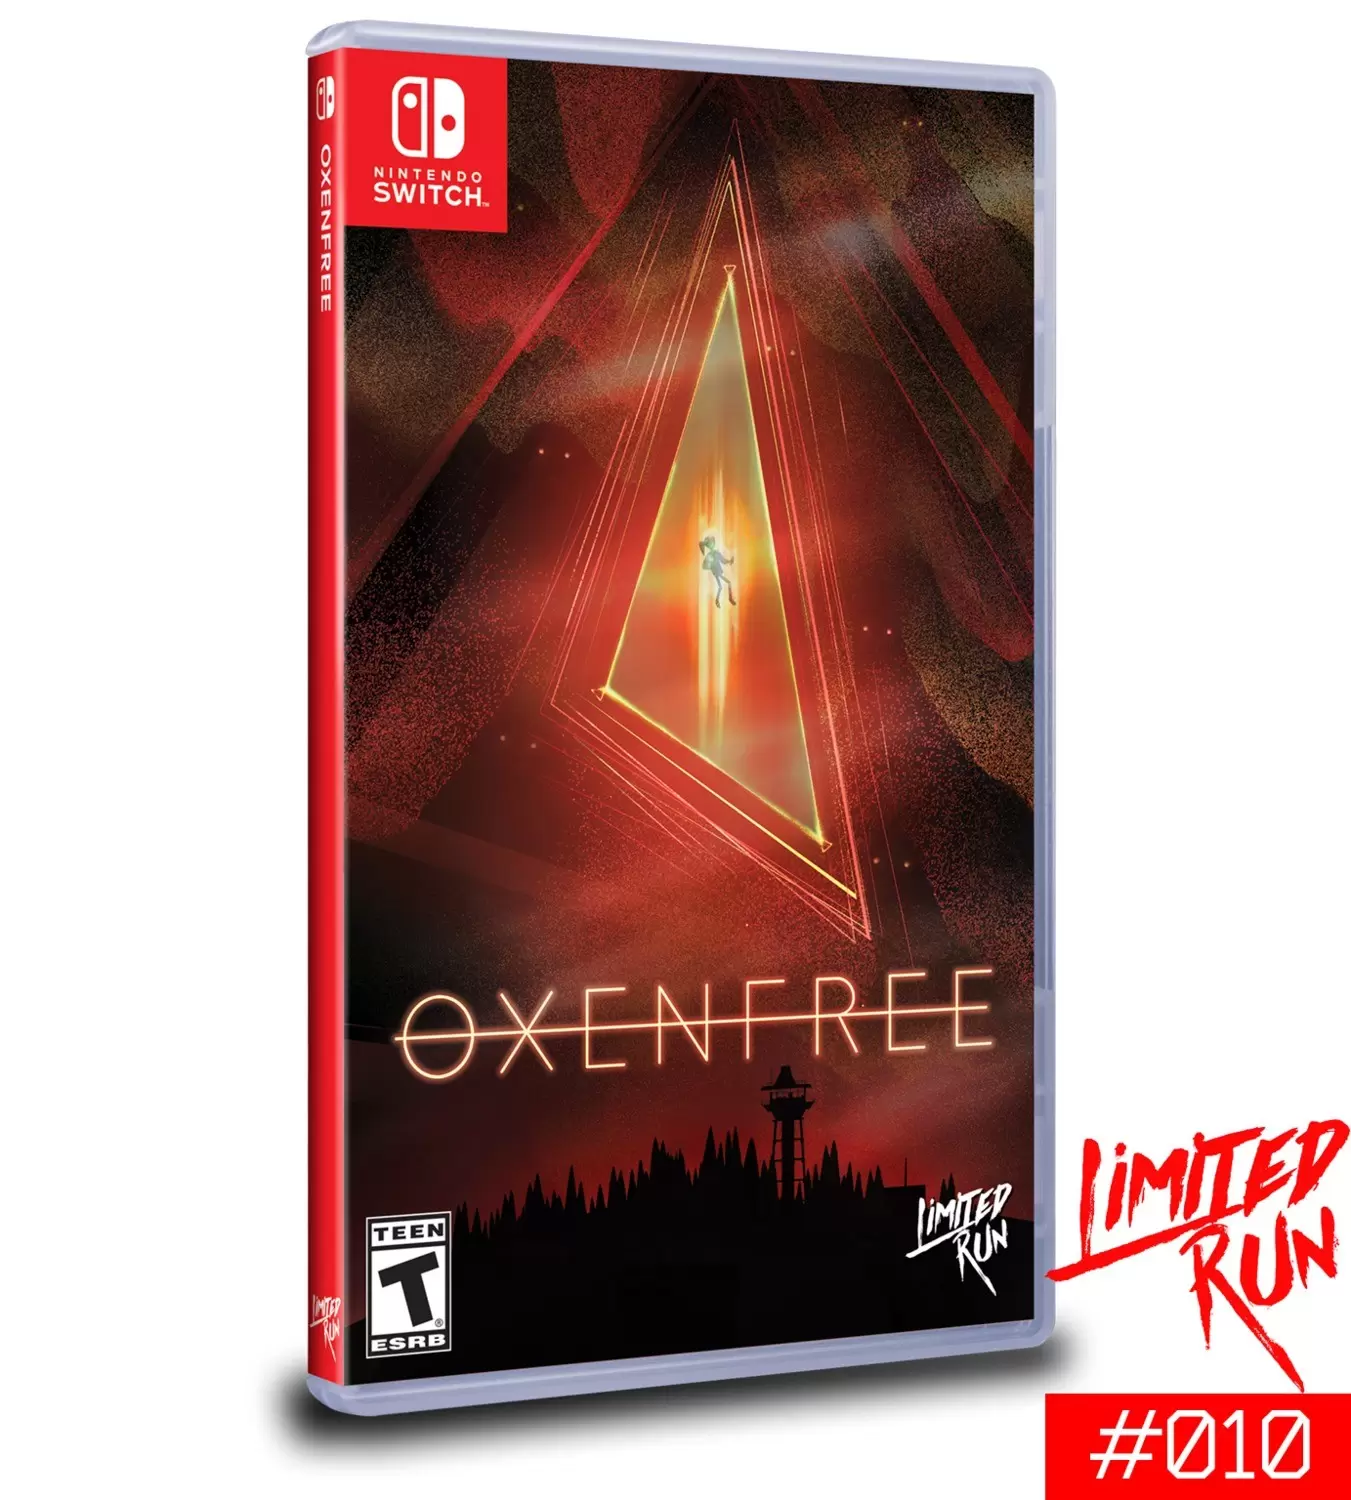 Nintendo Switch Games - OxenFree